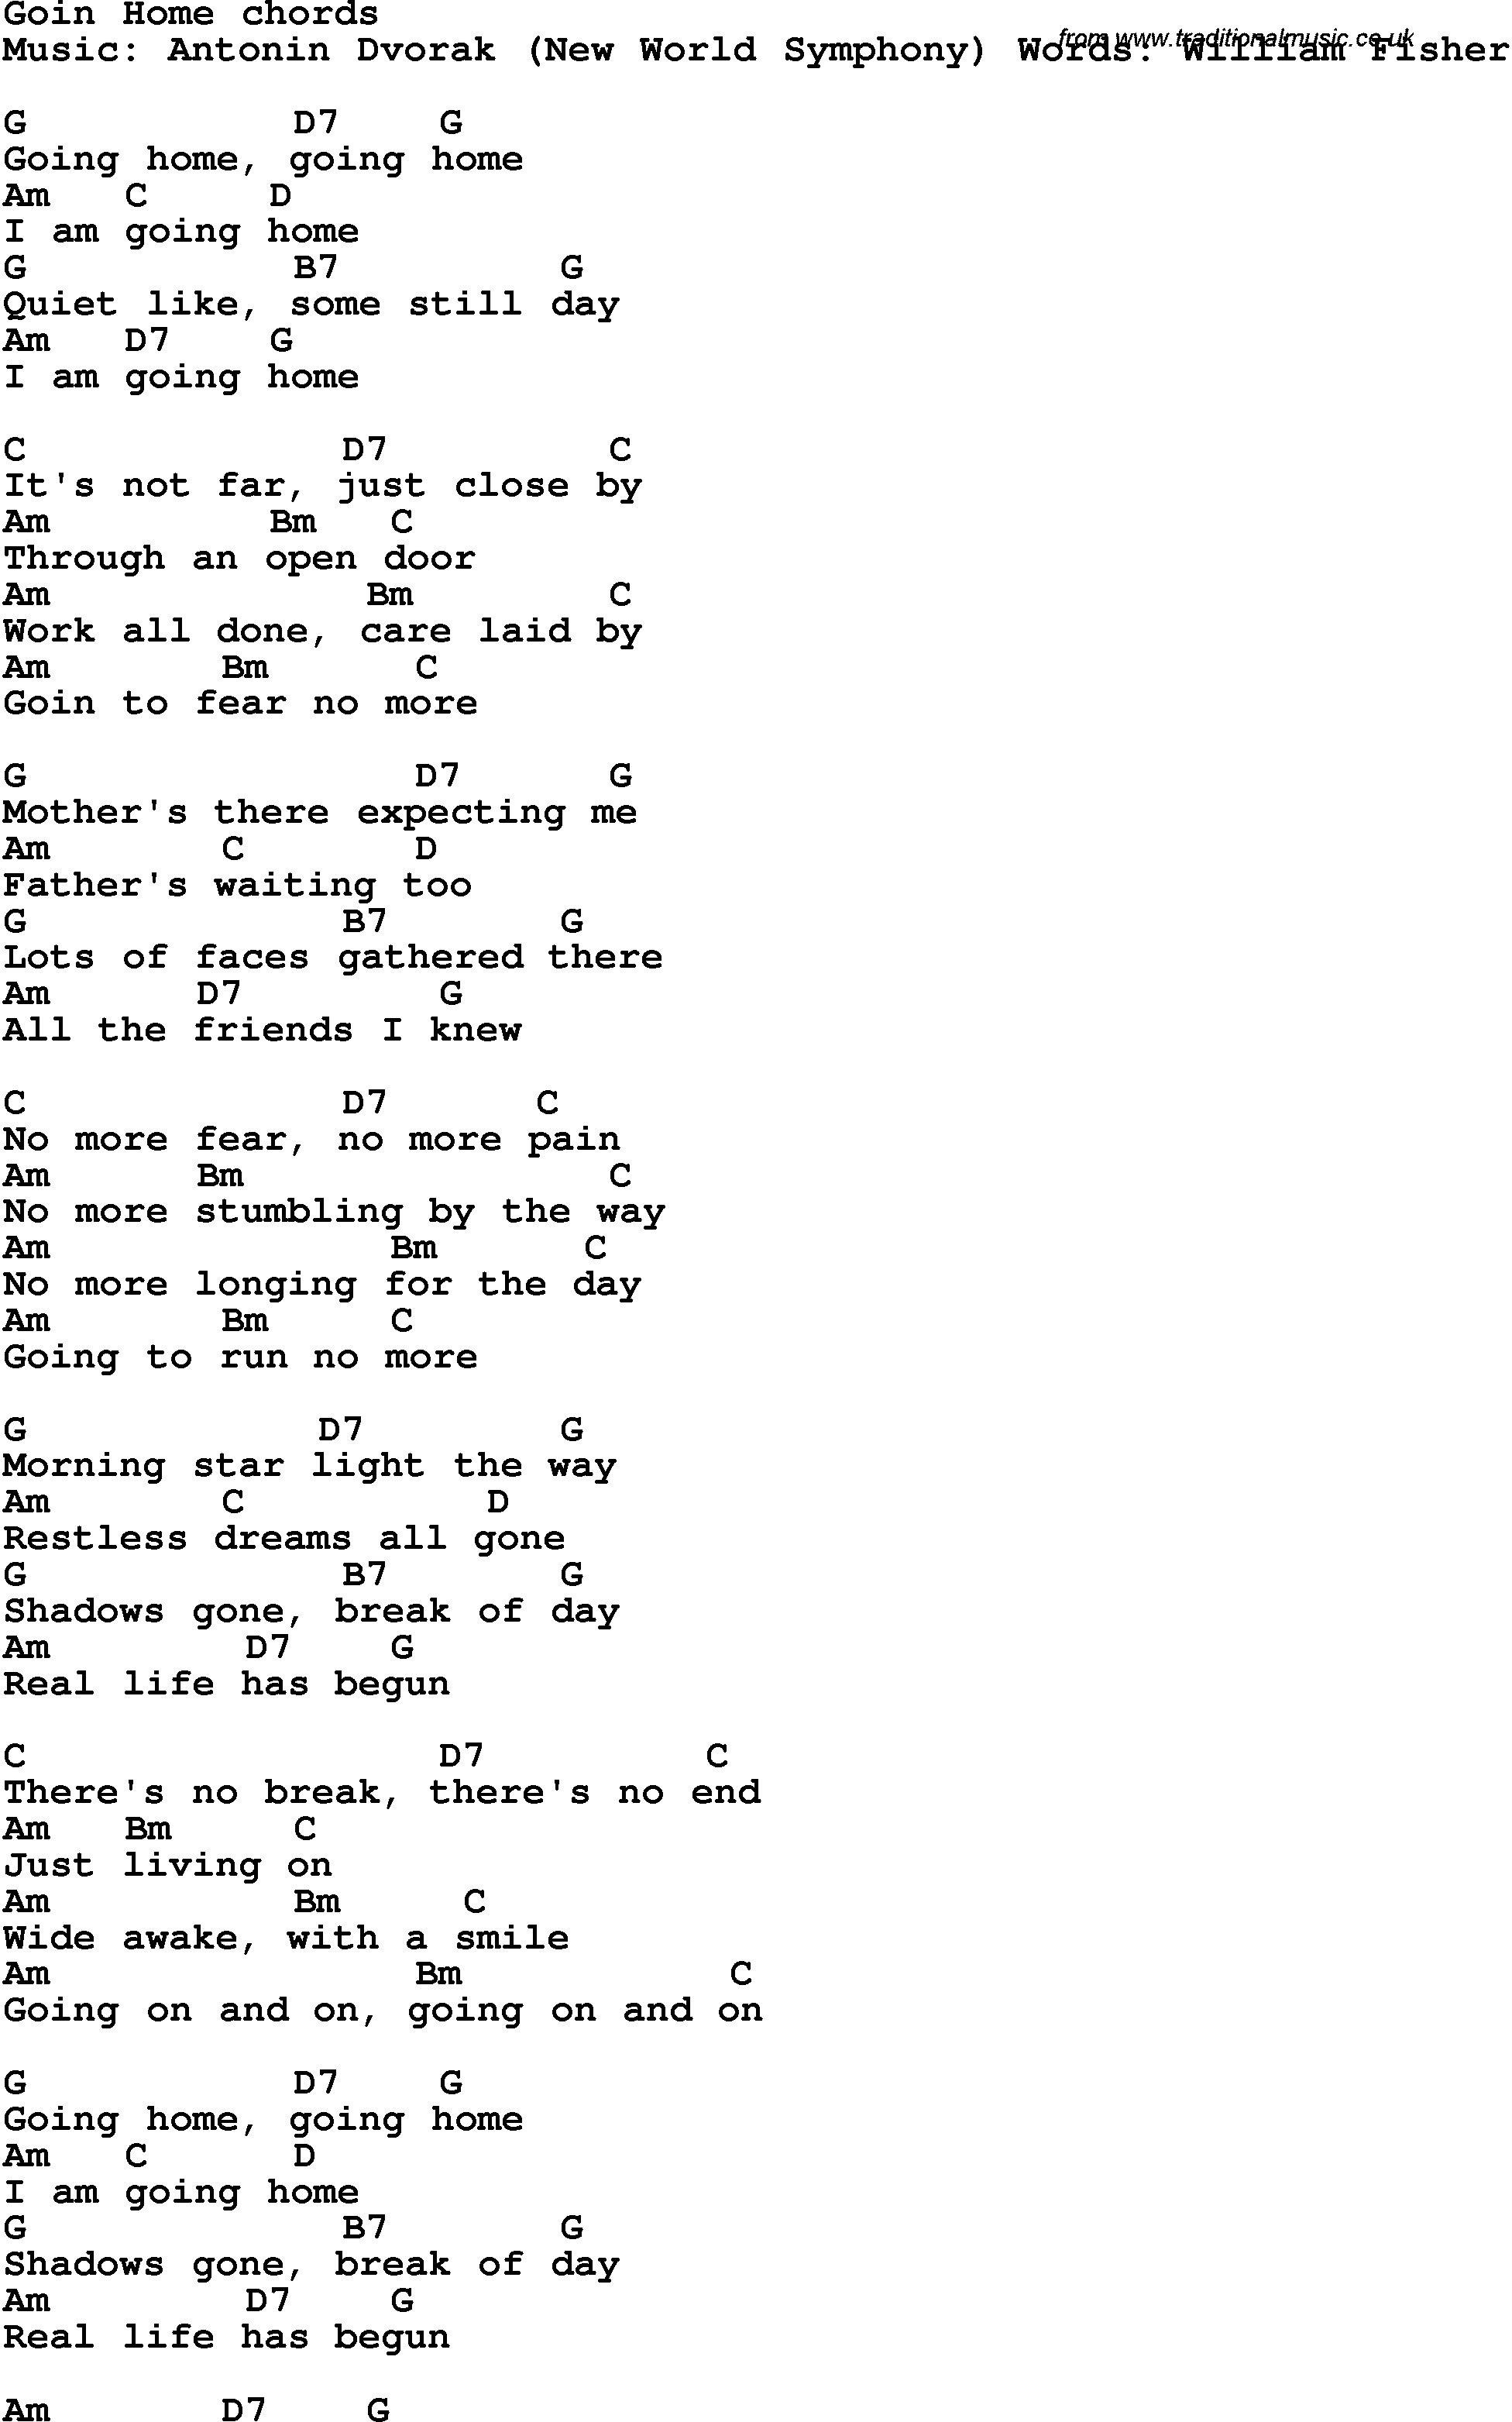 Song Lyrics with guitar chords for Goin' Home